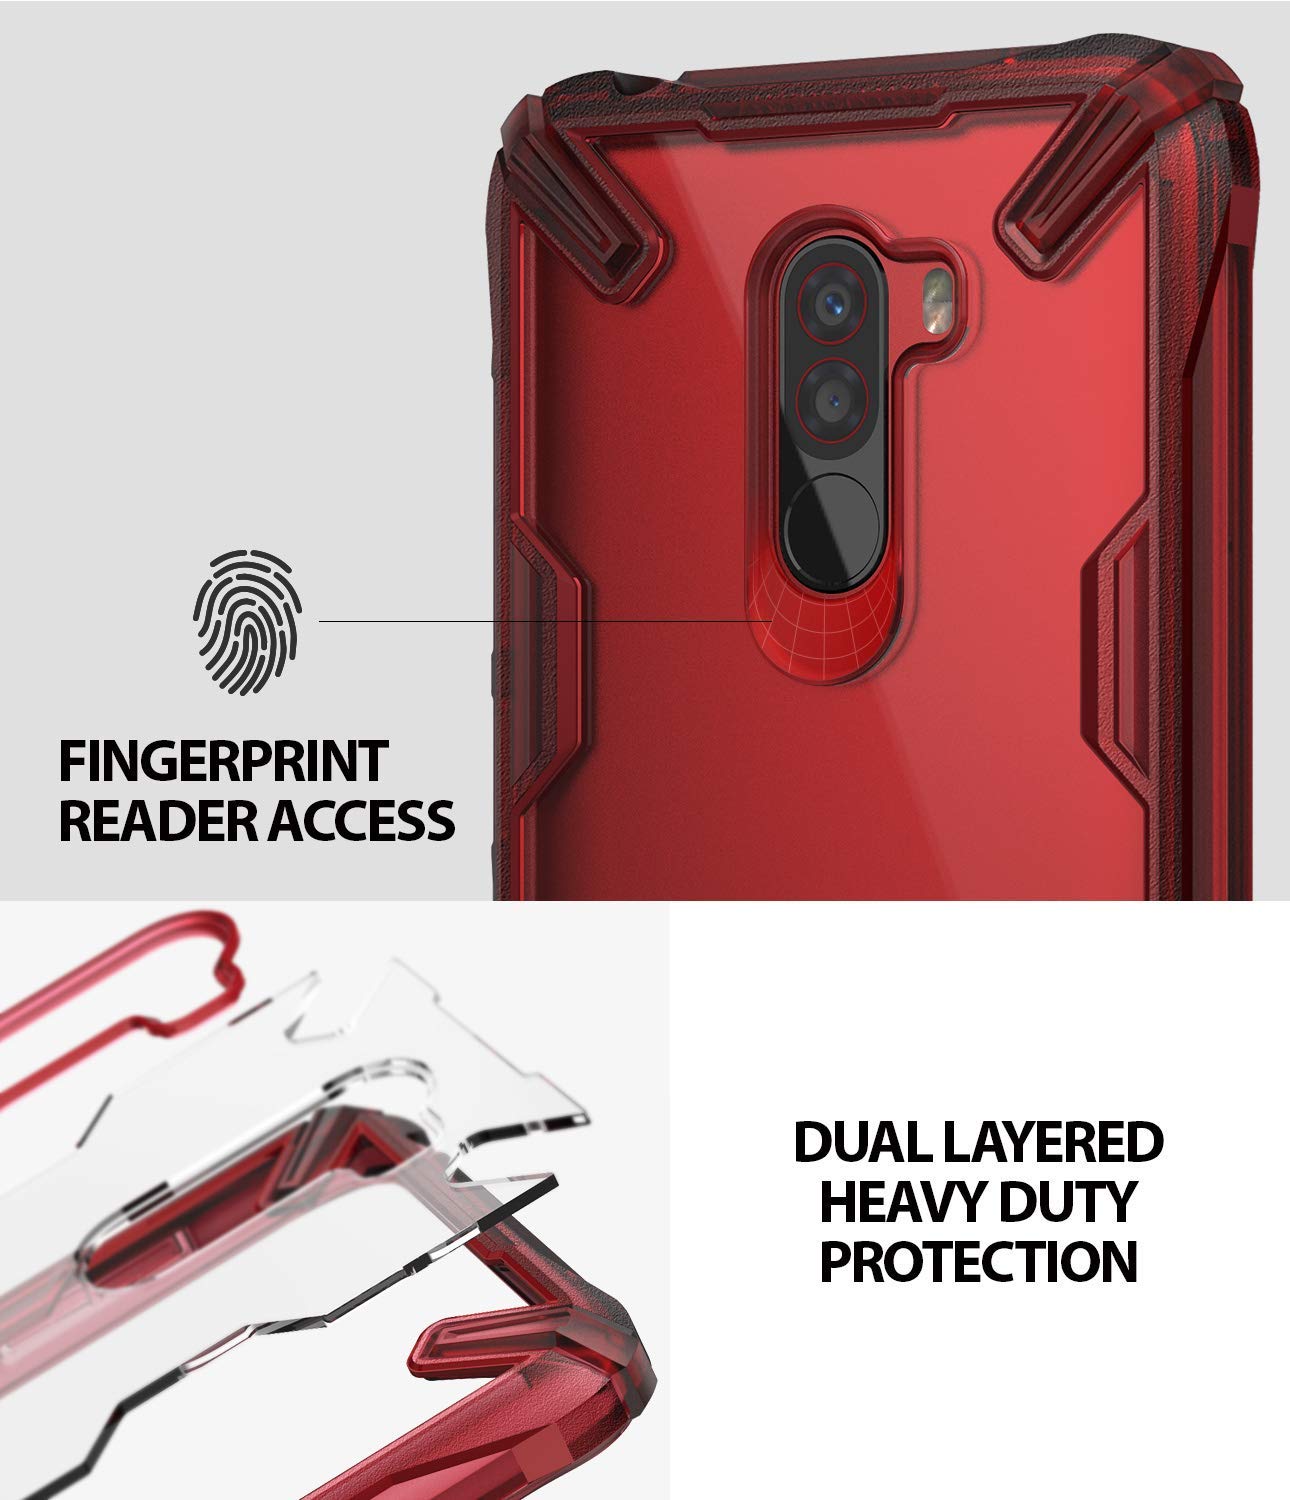 fingerprint reader access with dual layered heavy protection 